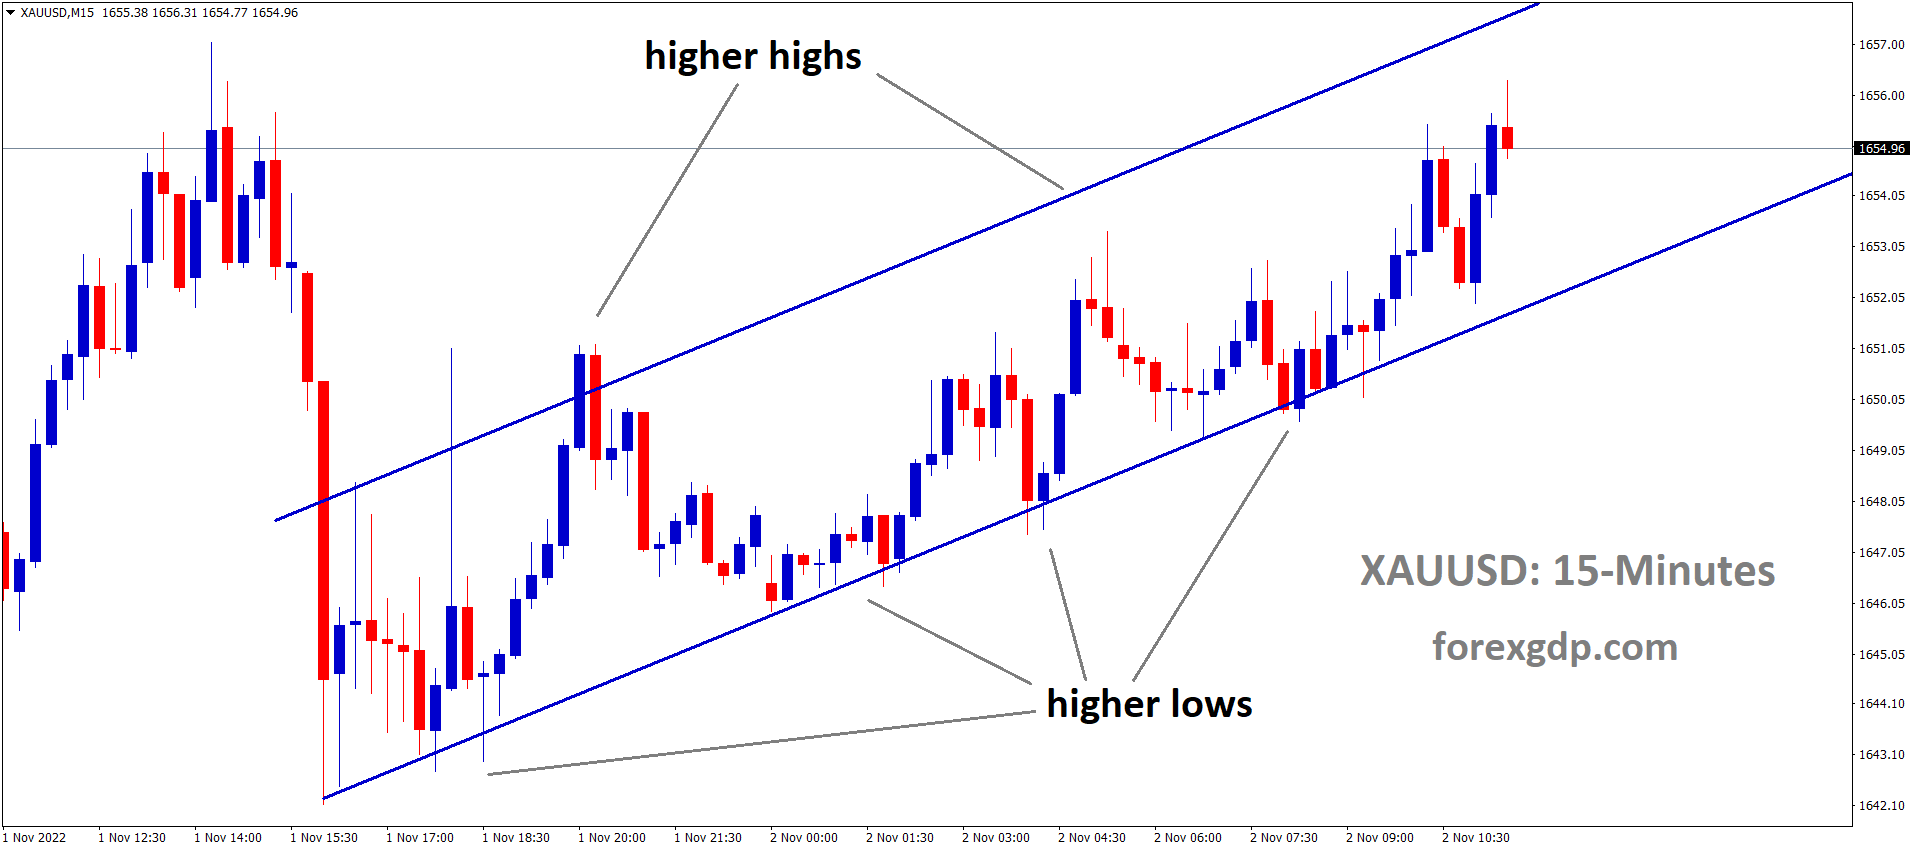 XAUUSD Gold price is moving in an Ascending channel and the market has rebounded from the higher low area of the channel1